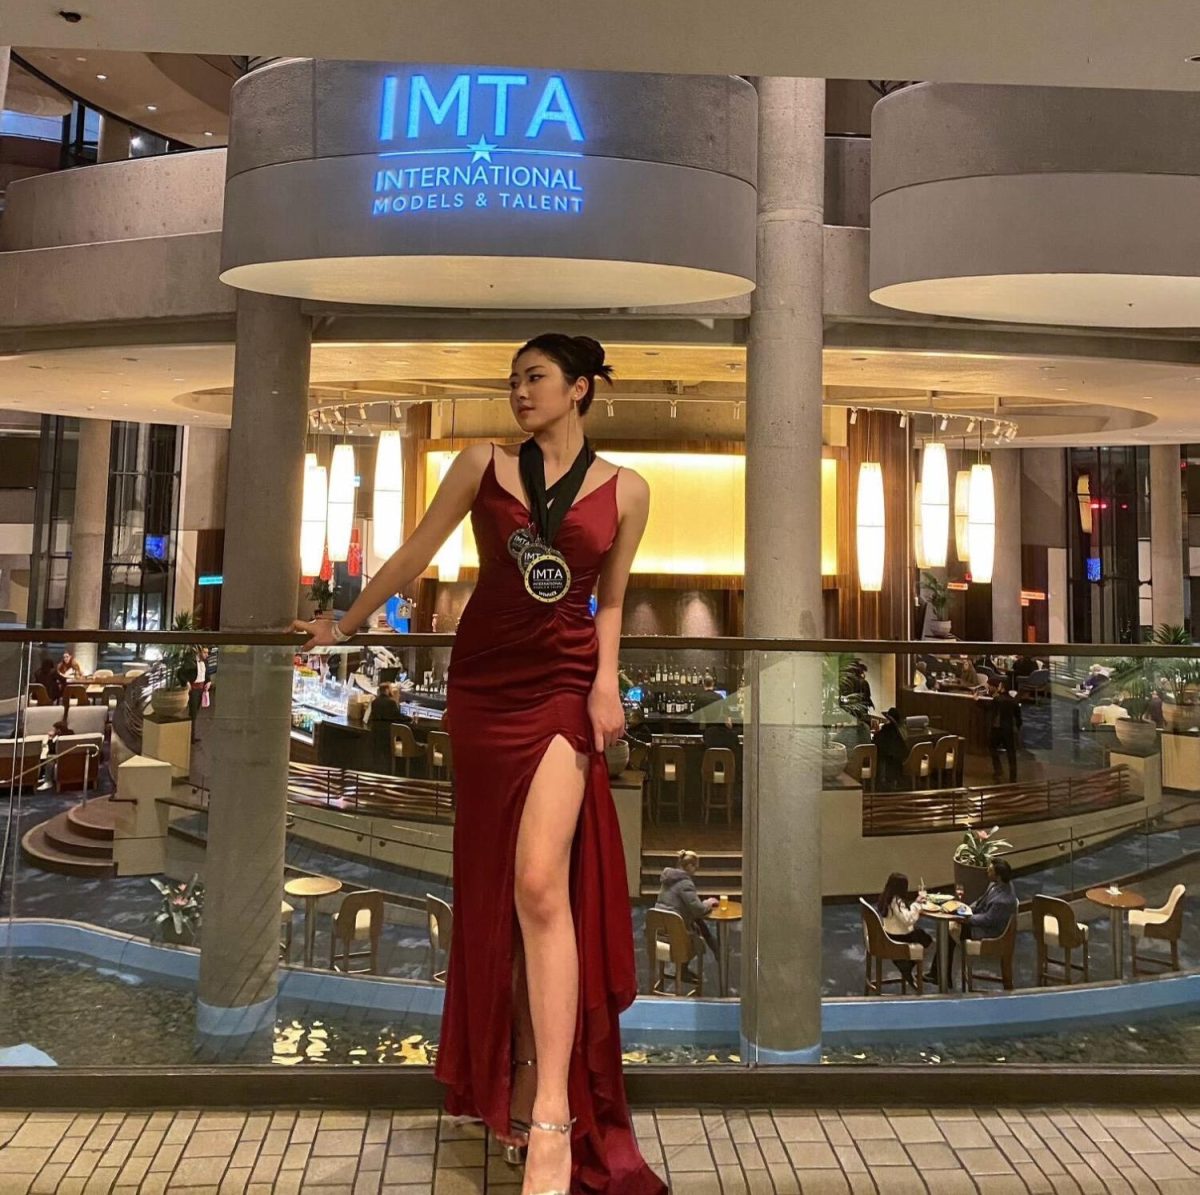 Rita Gao attended the International Models & Talent competition and won many awards.